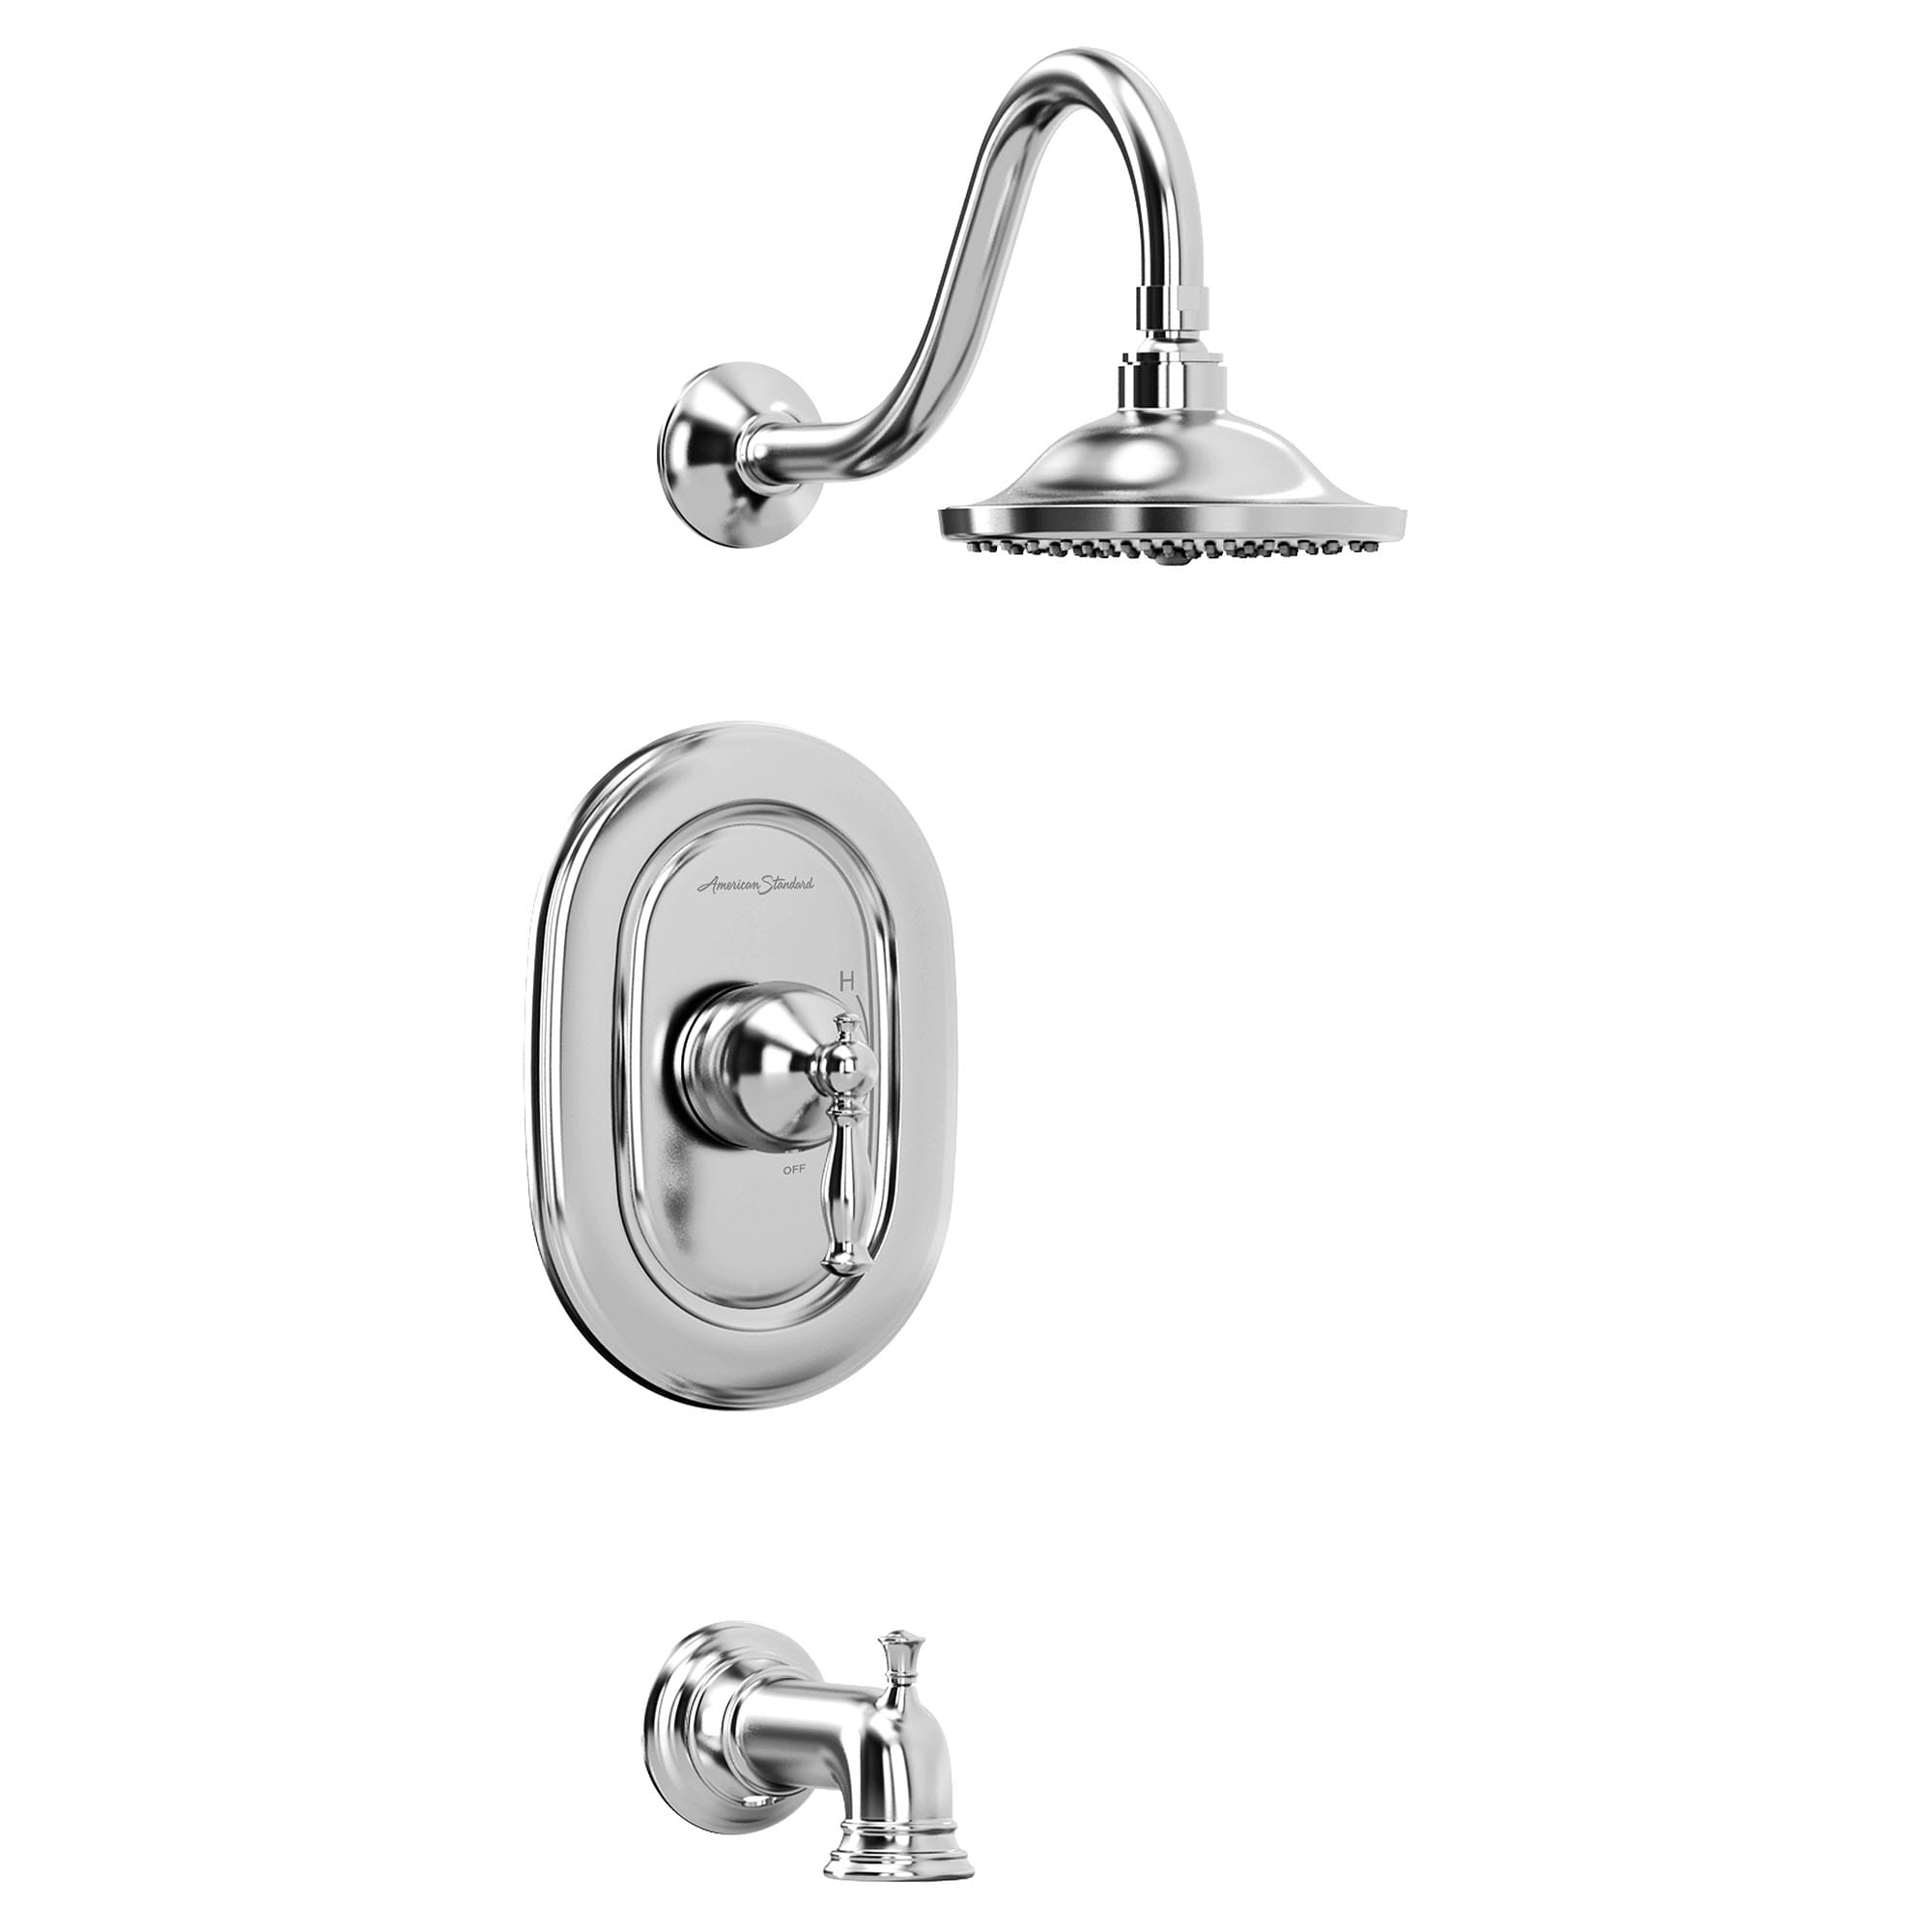 Quentin 25 gpm 95 L min Tub and Shower Trim Kit With Rain Showerhead Double Ceramic Pressure Balance Cartridge With Lever Handle CHROME